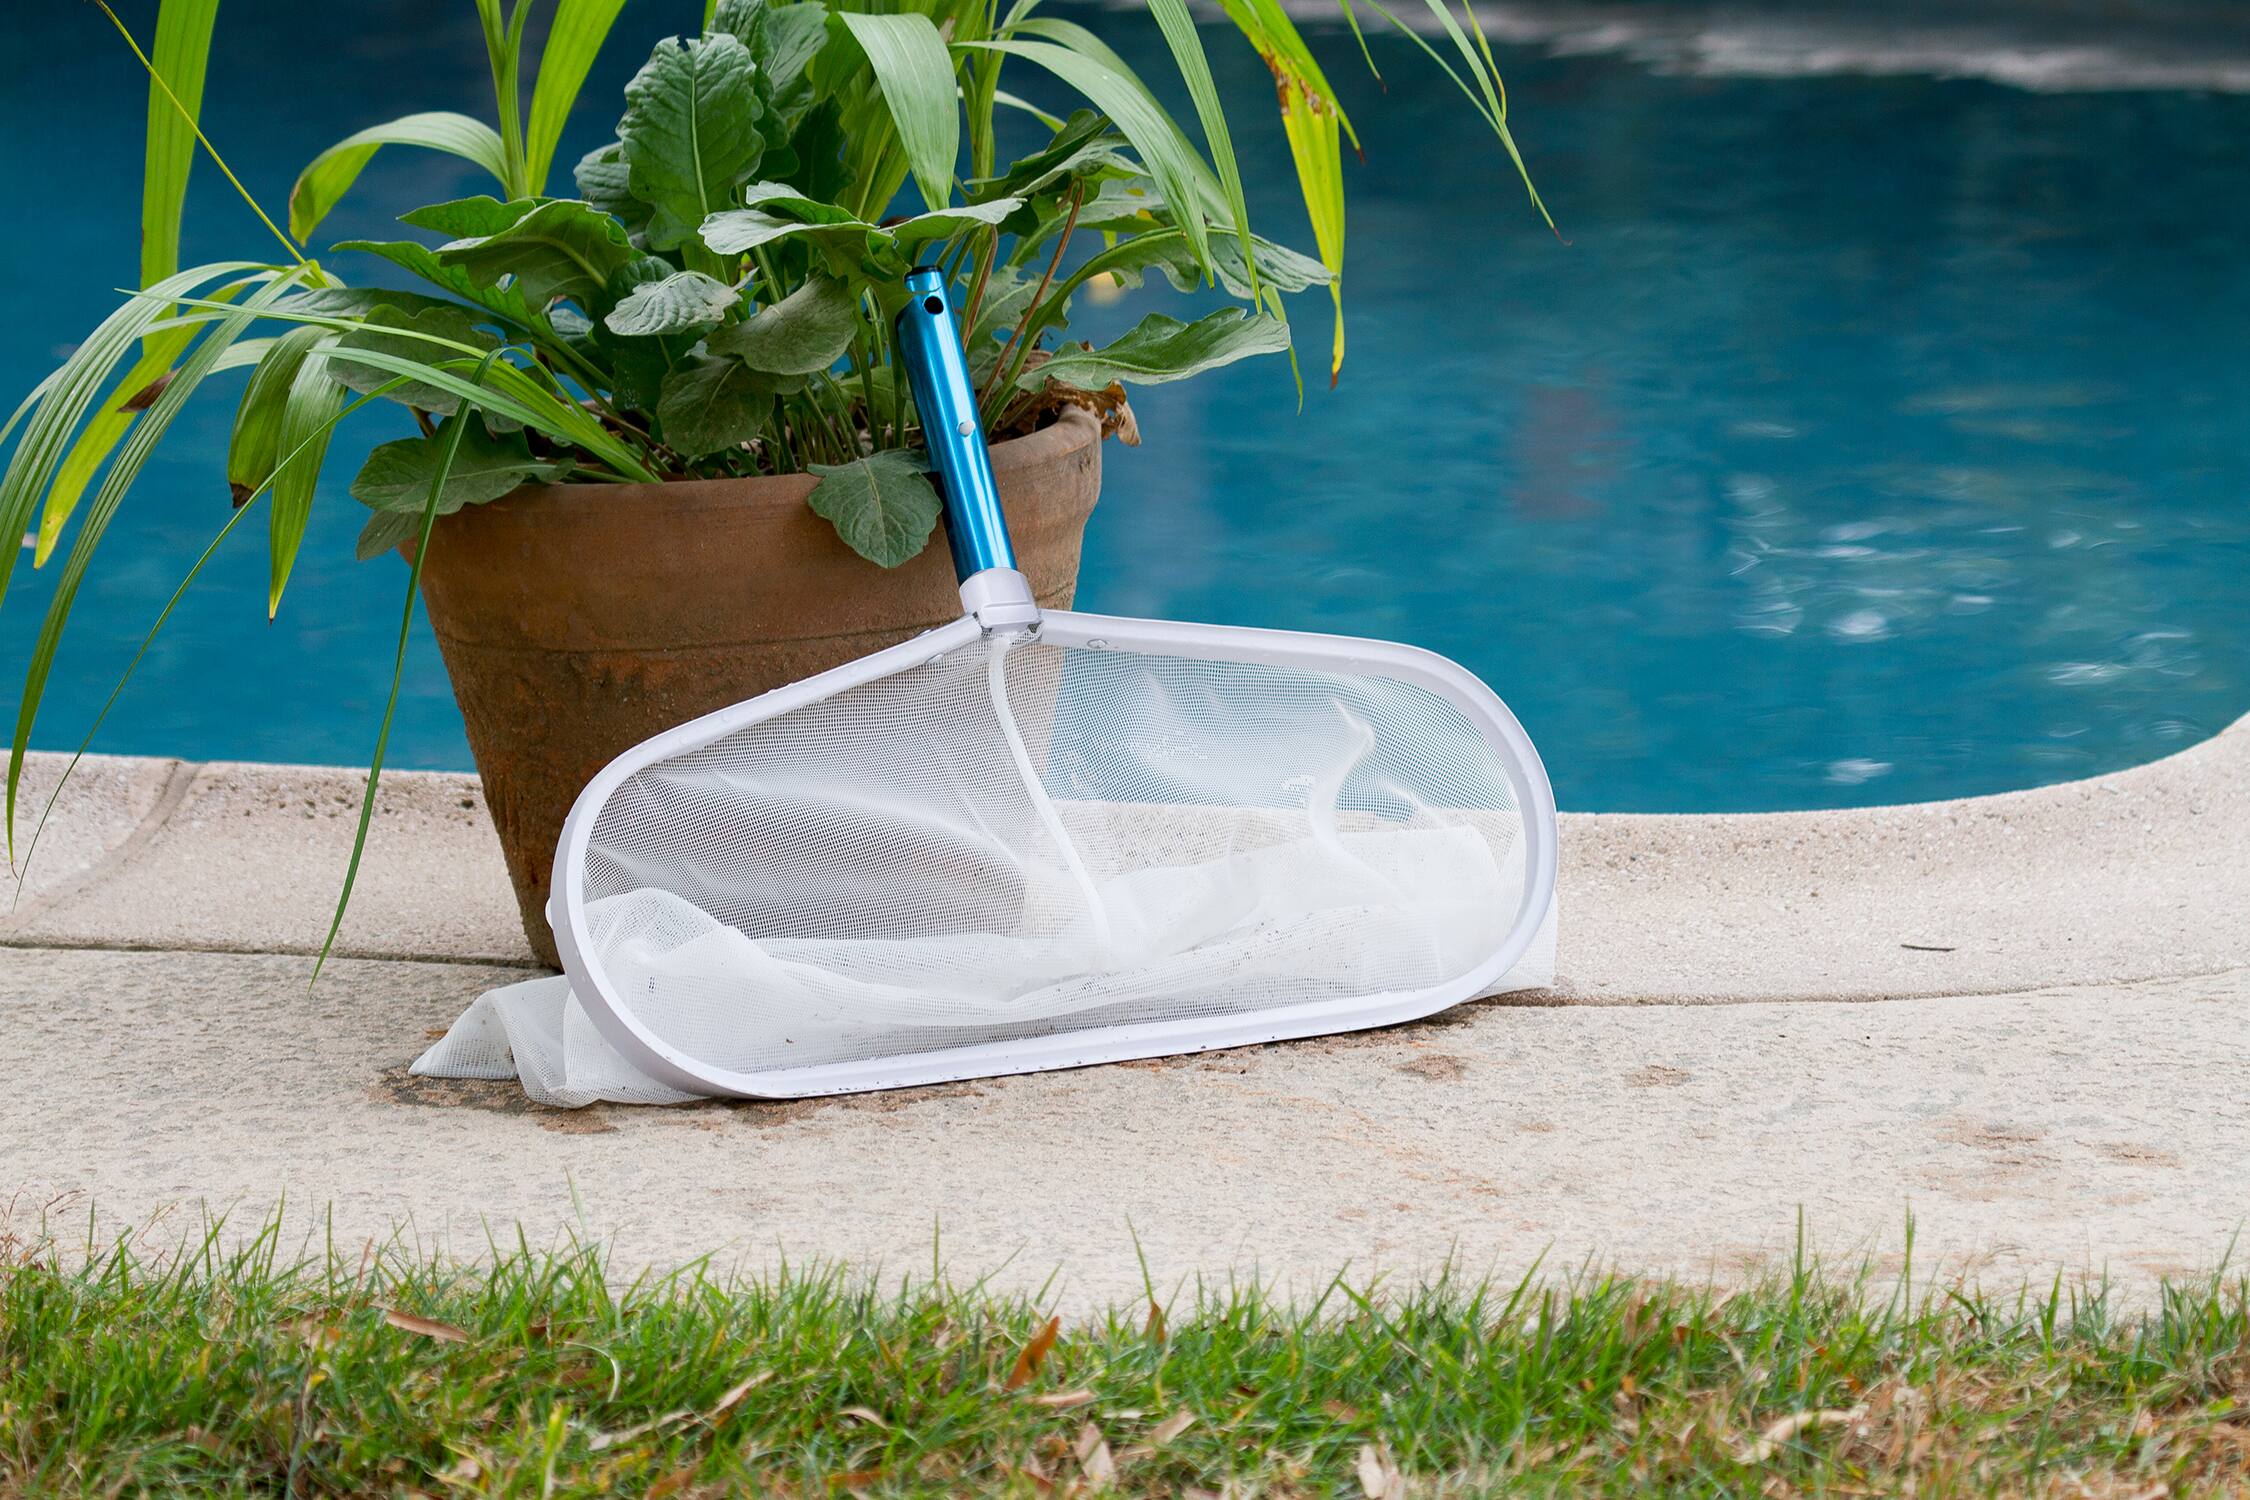 Image for Pool Cleaning Supplies